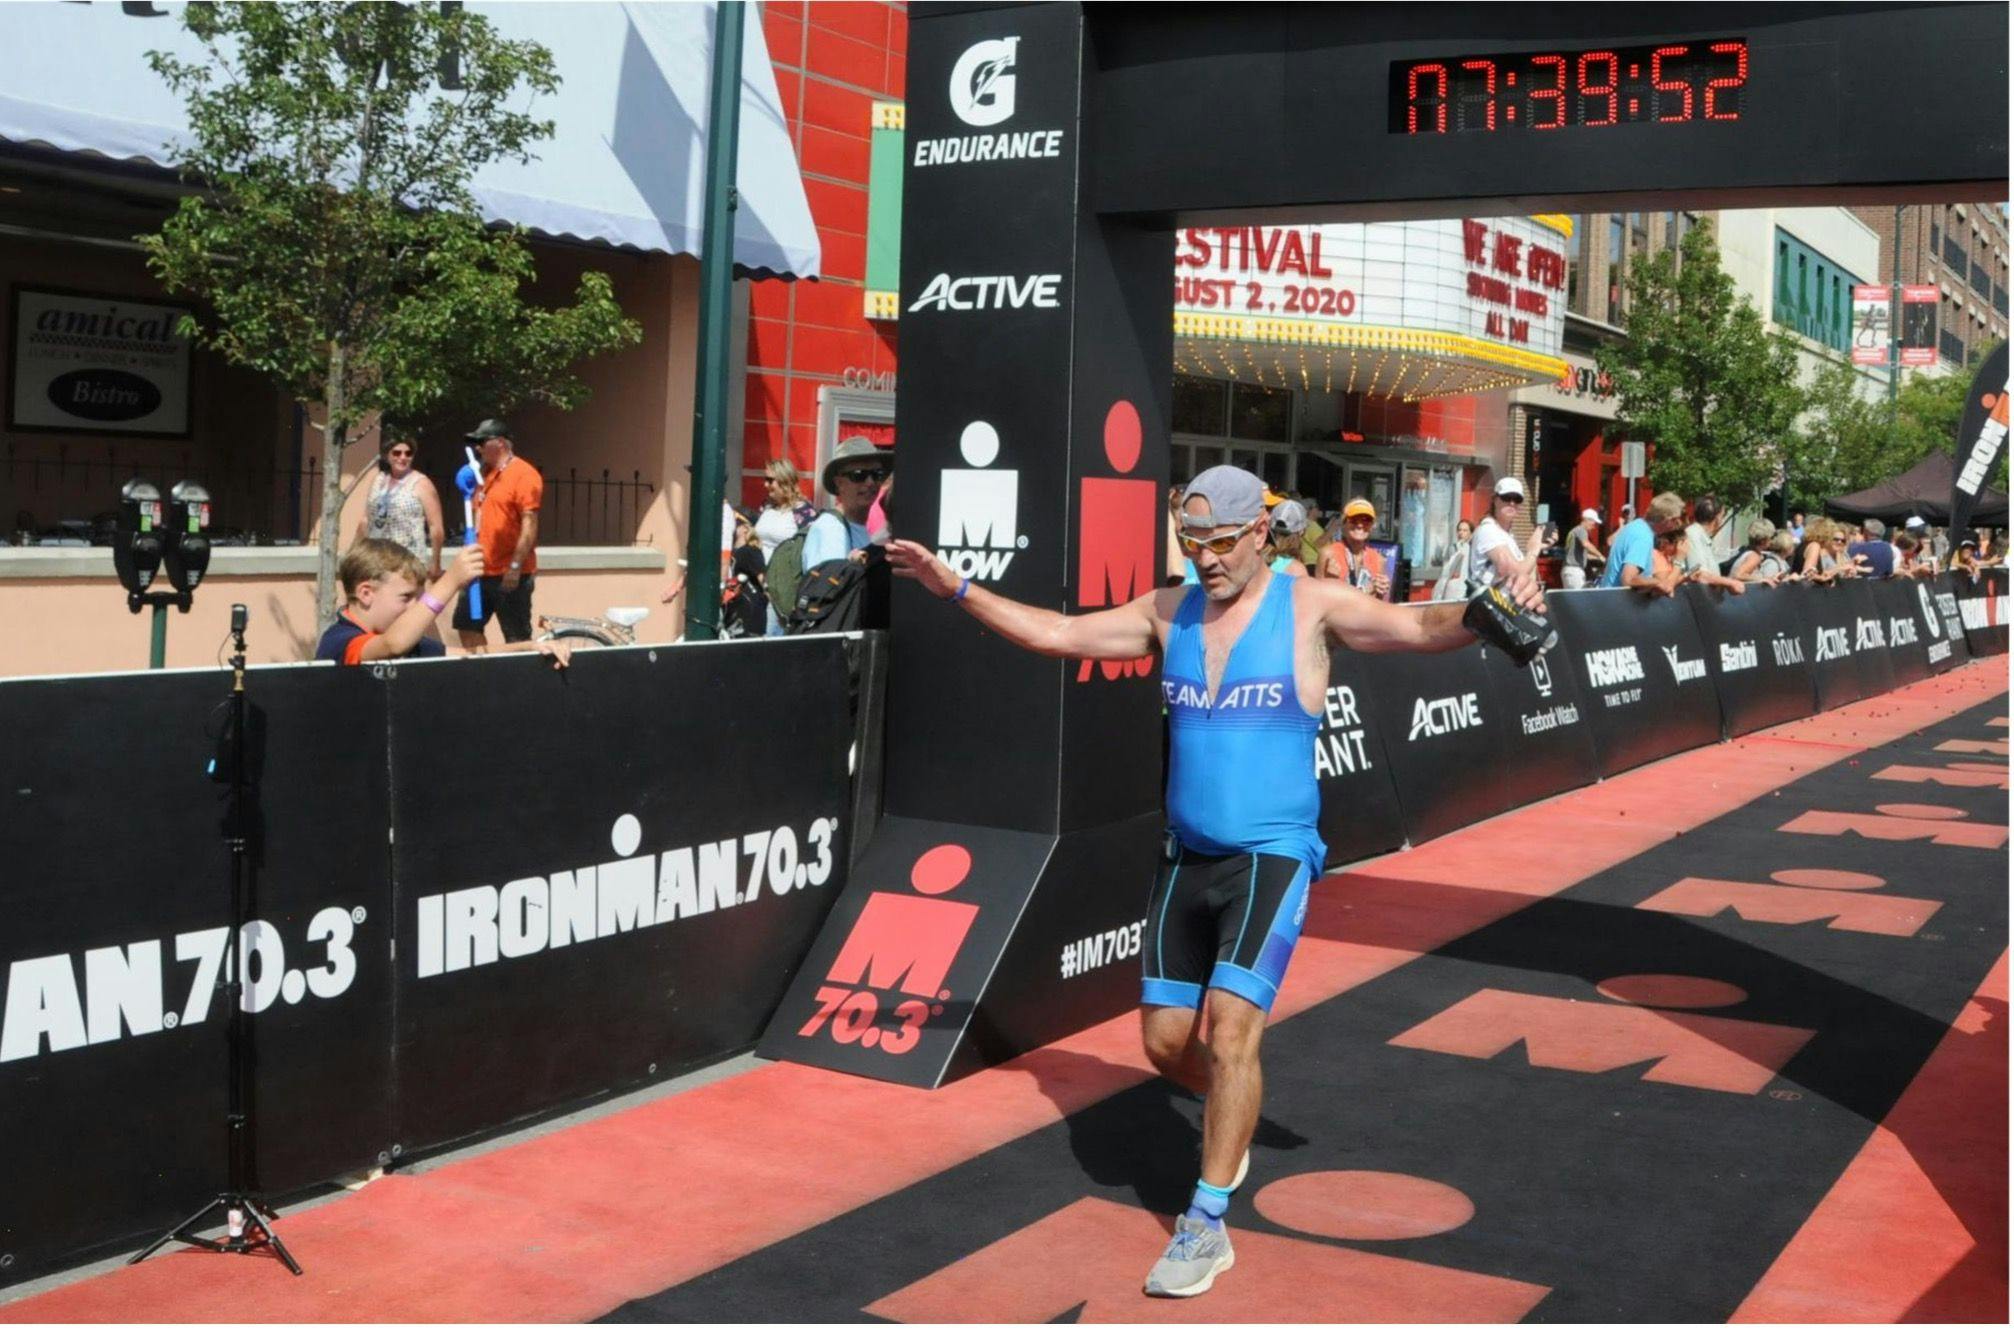 Cancer survivor Robert Atteberry completing the 2019 Ironman 70.3 Traverse City